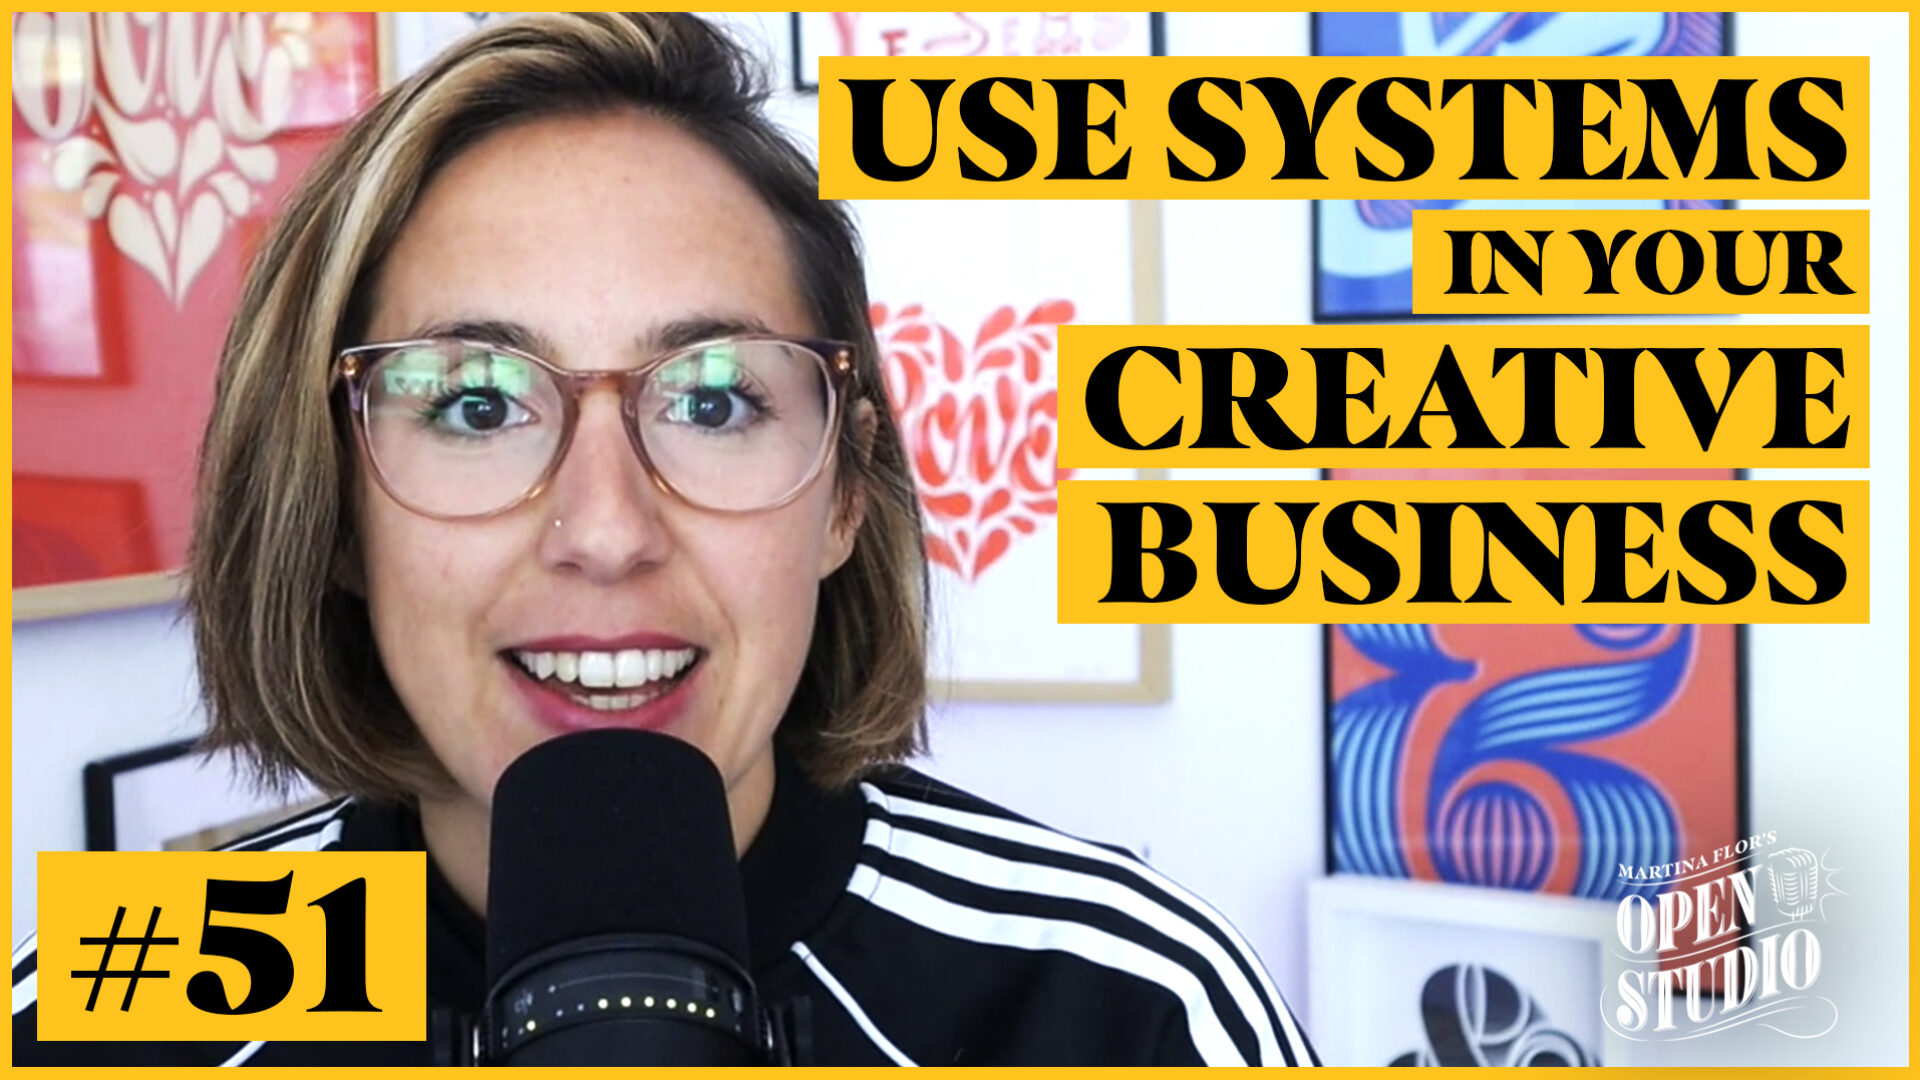 51. Martina Flor. The Systems that You Need in Your Creative Business.